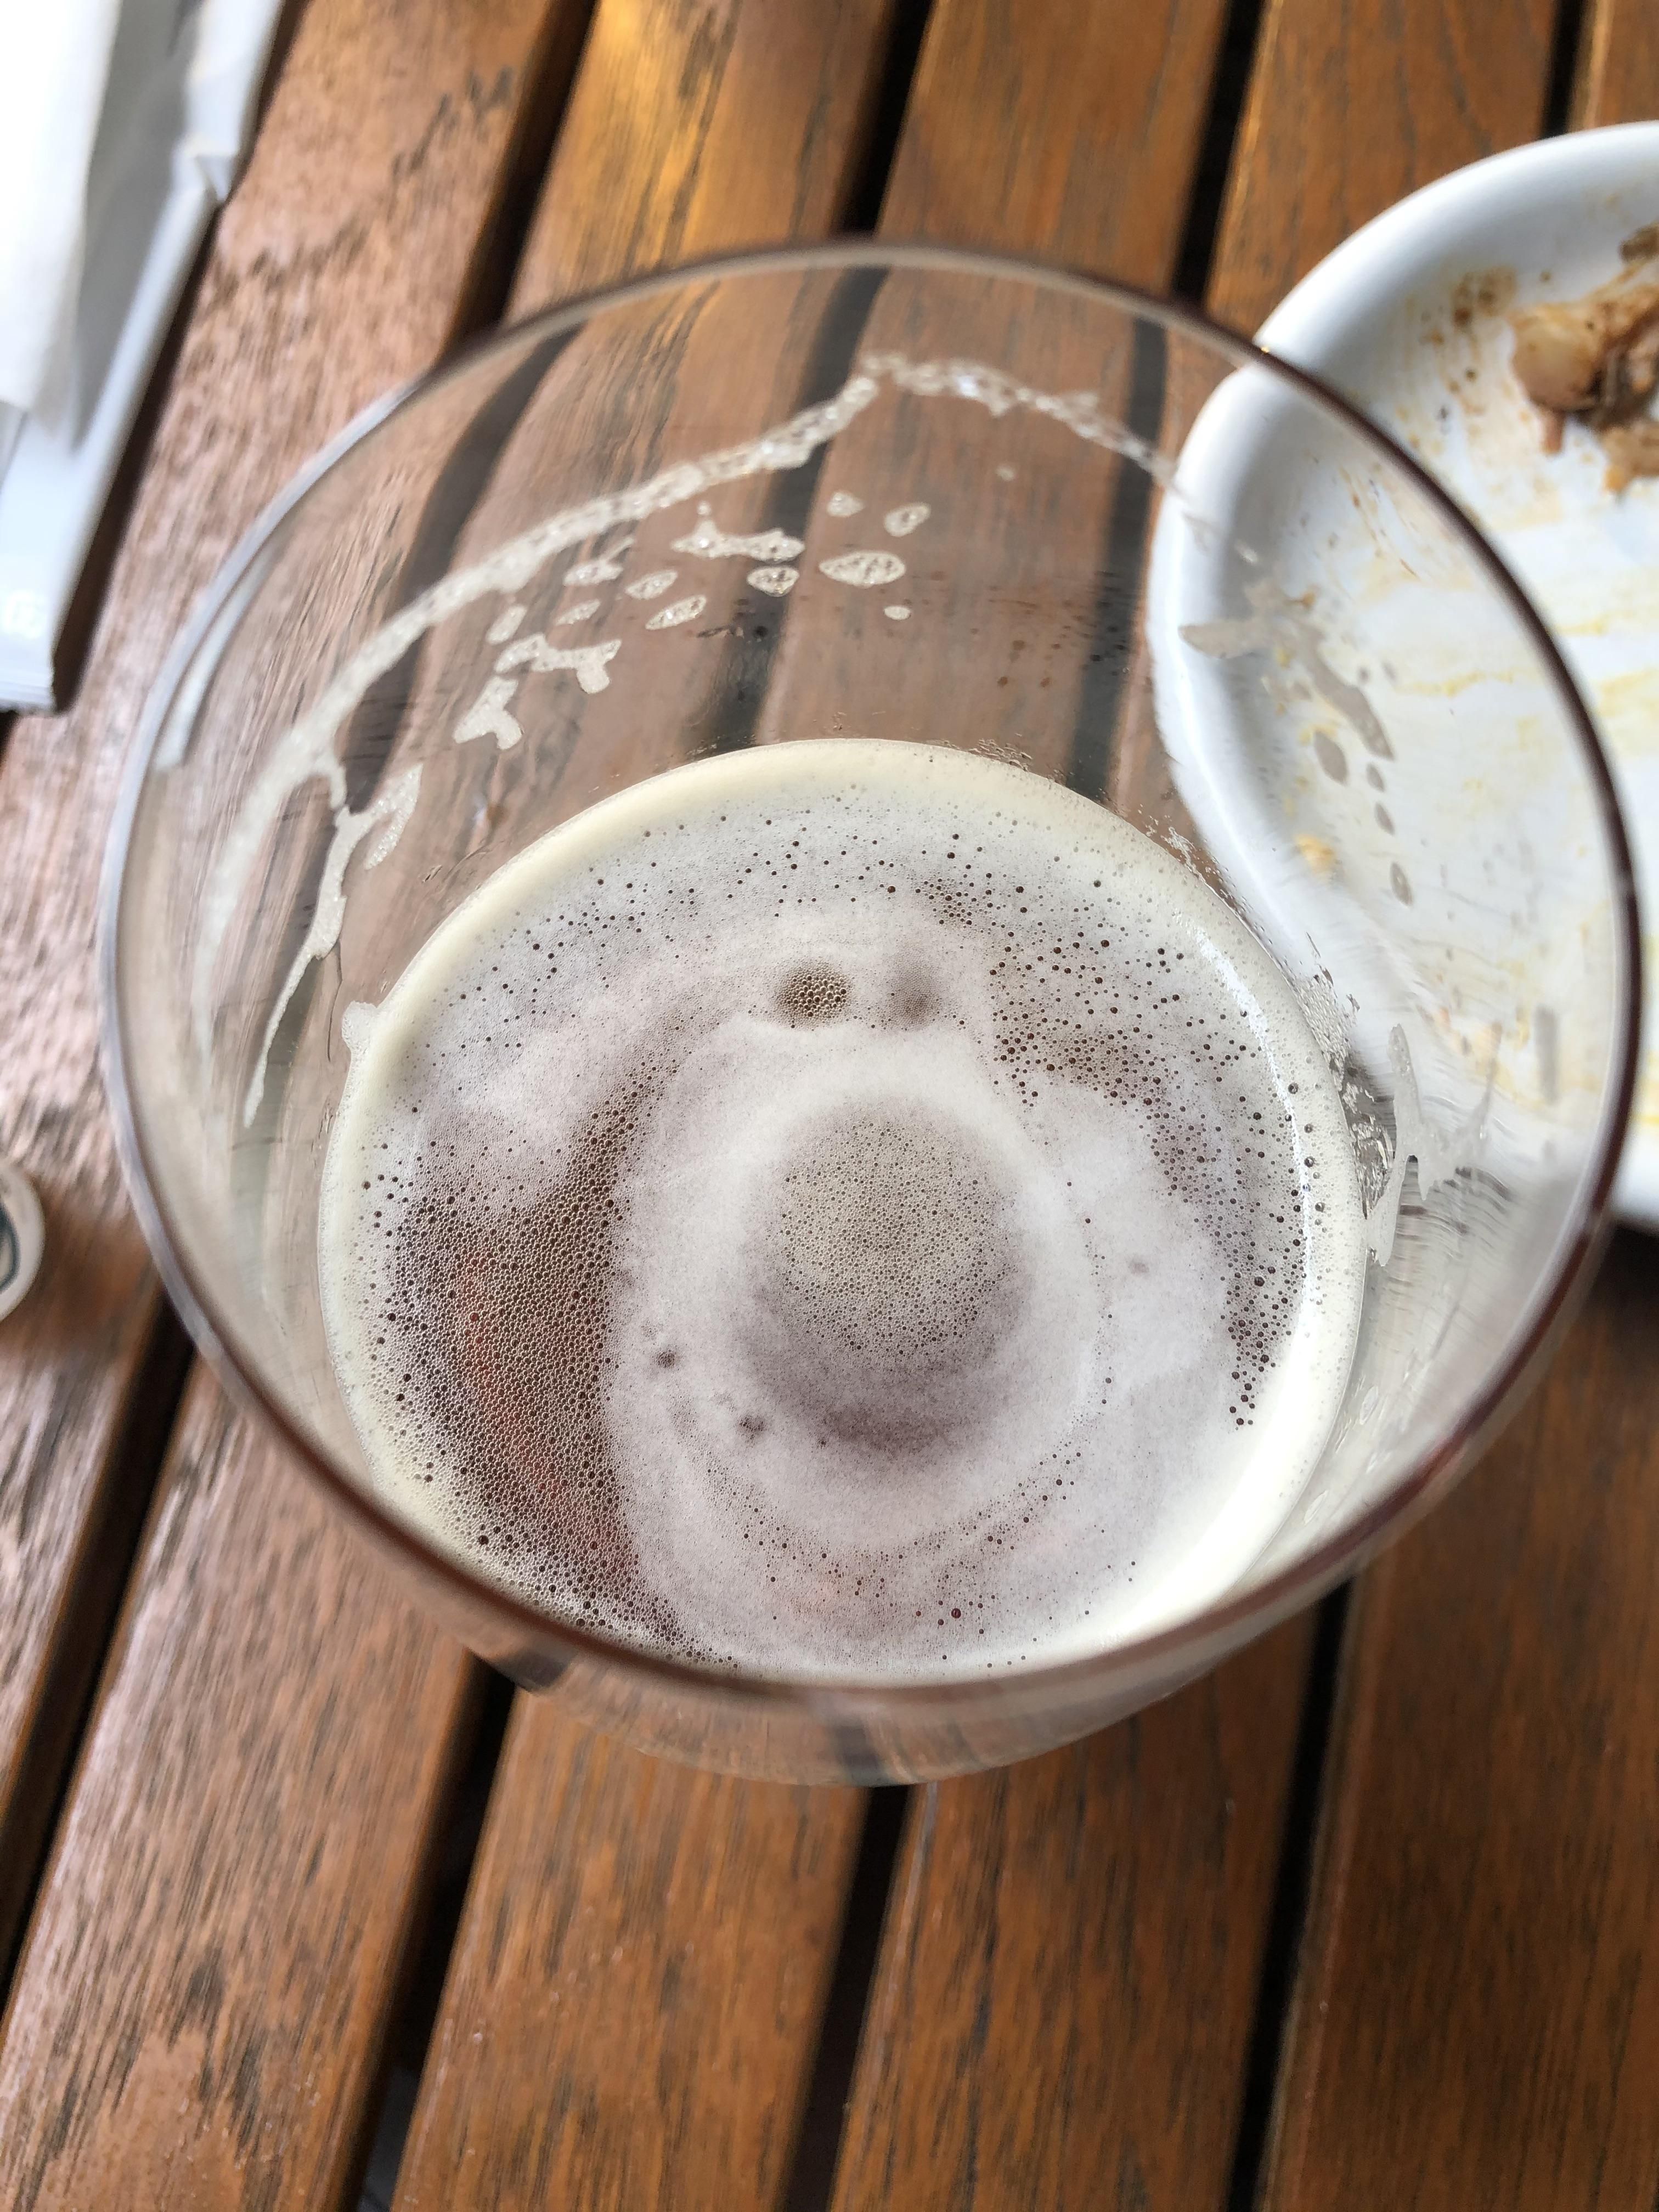 A friendly pup in my beer